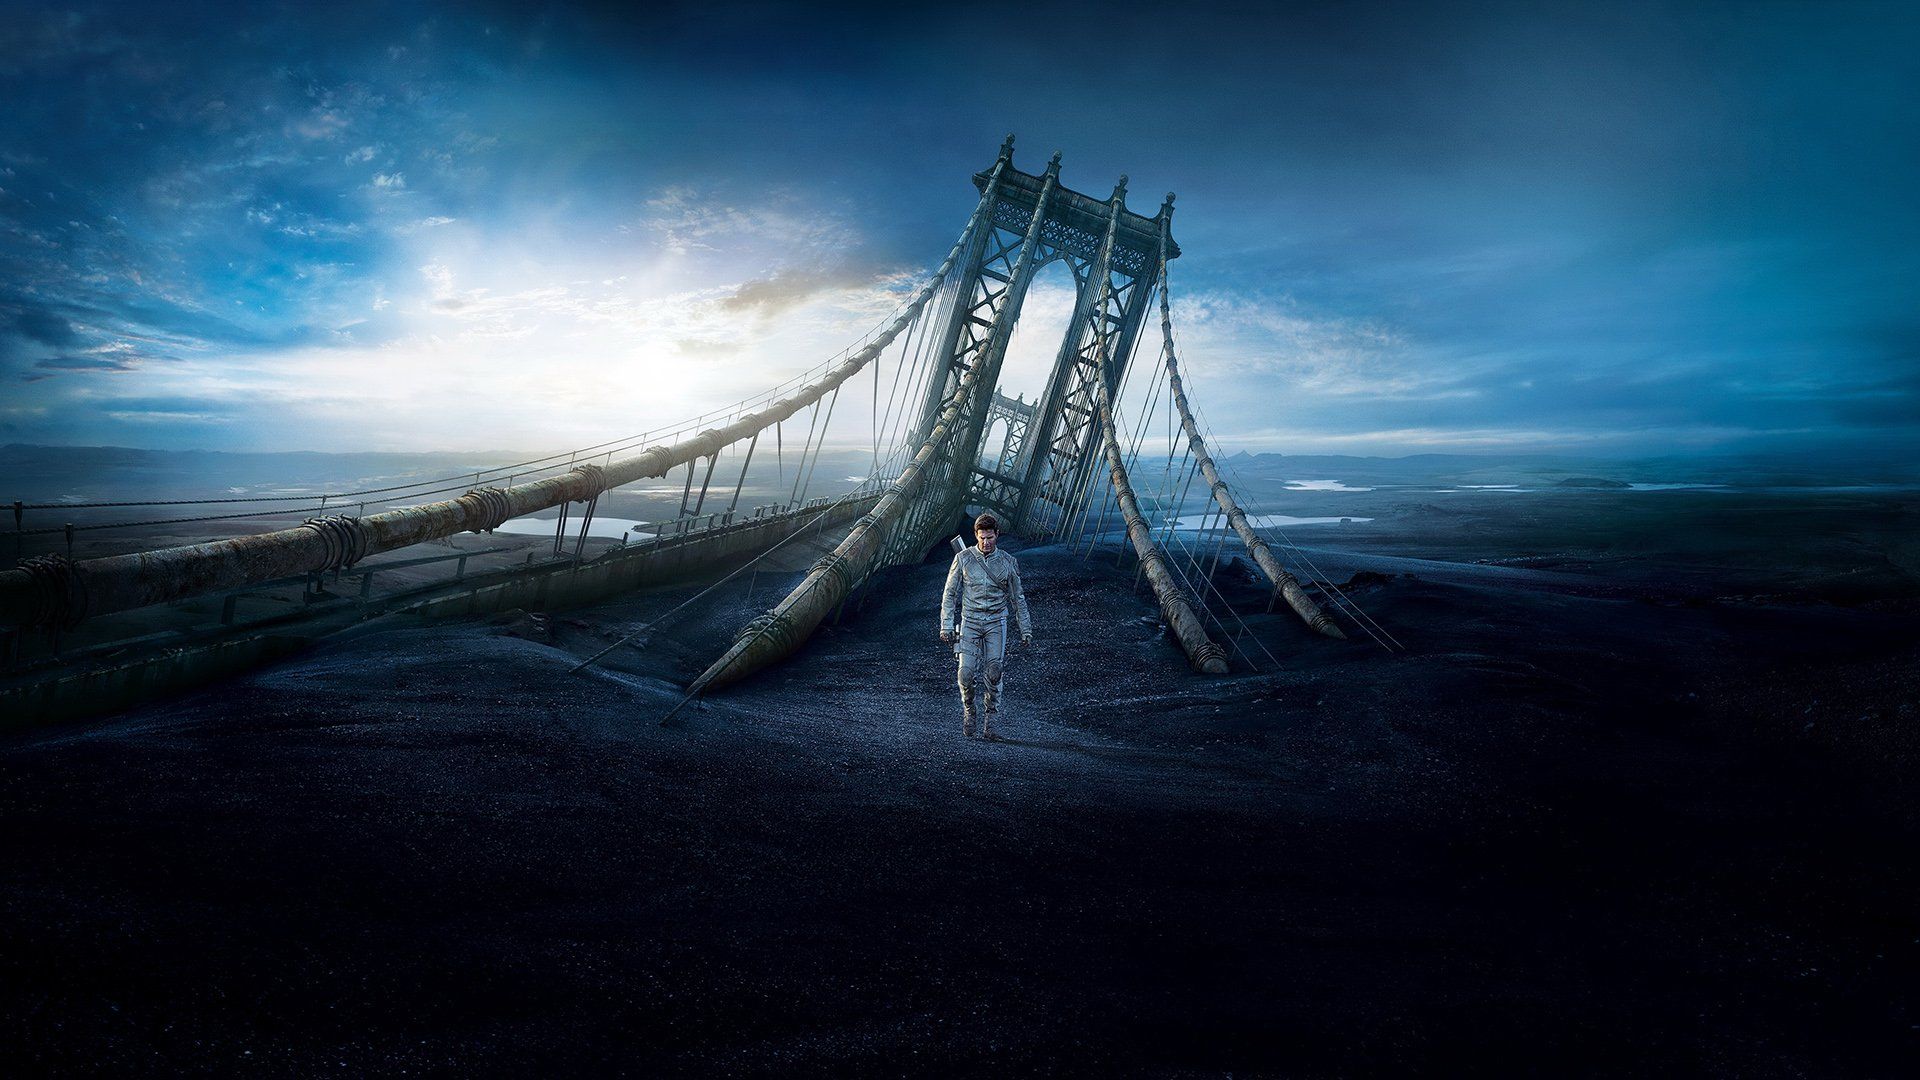 Oblivion HD Wallpaper and Background Image